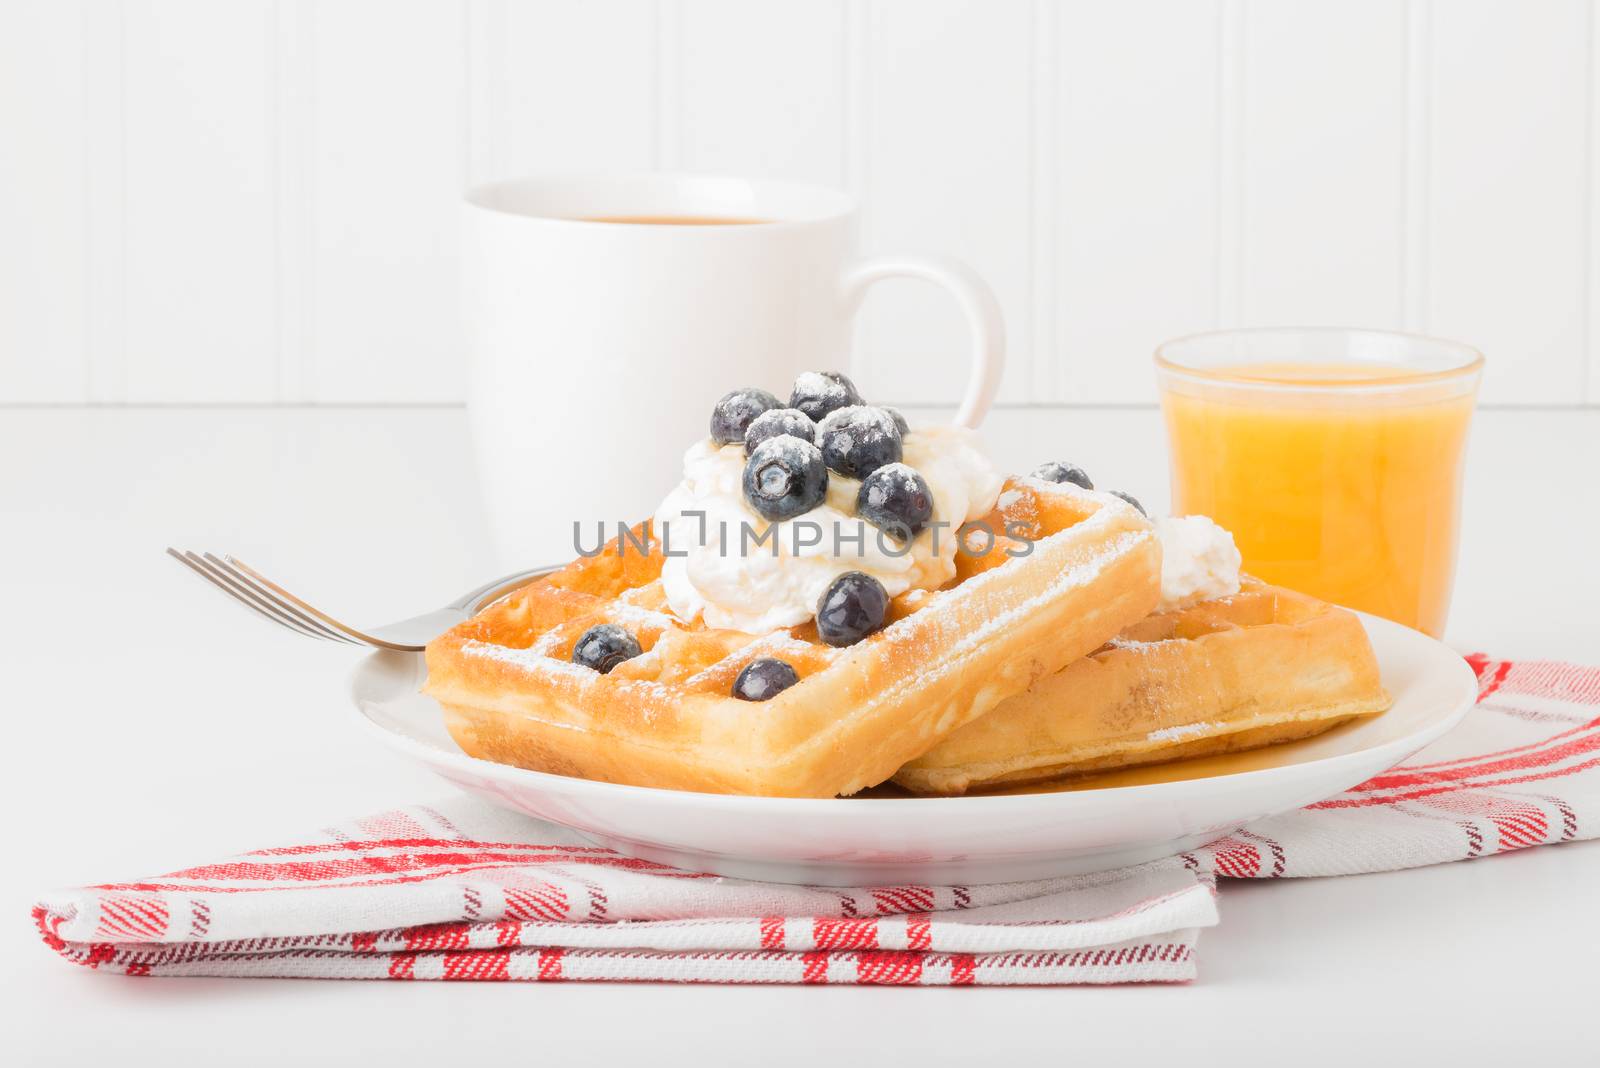 Plate of fresh waffles with blueberries, coffee and juice.